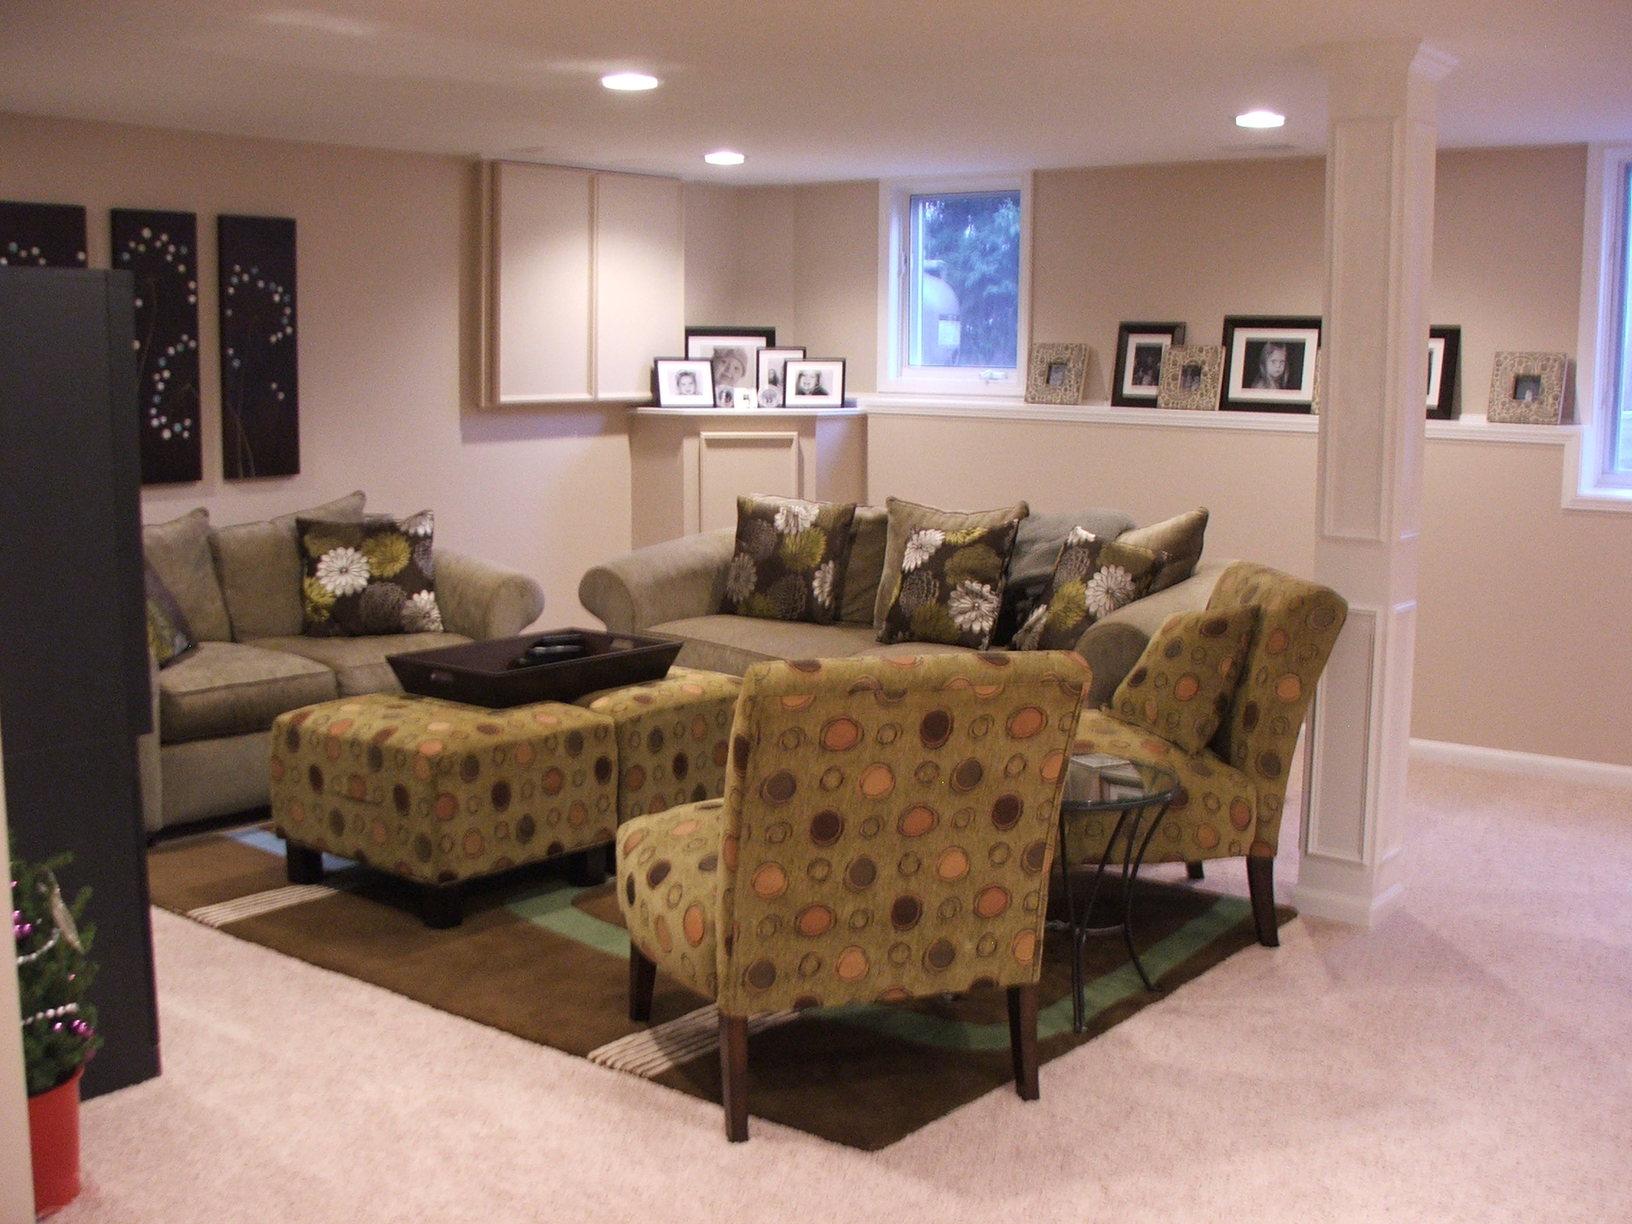 Working the Room: What’s Popular in Basements Now